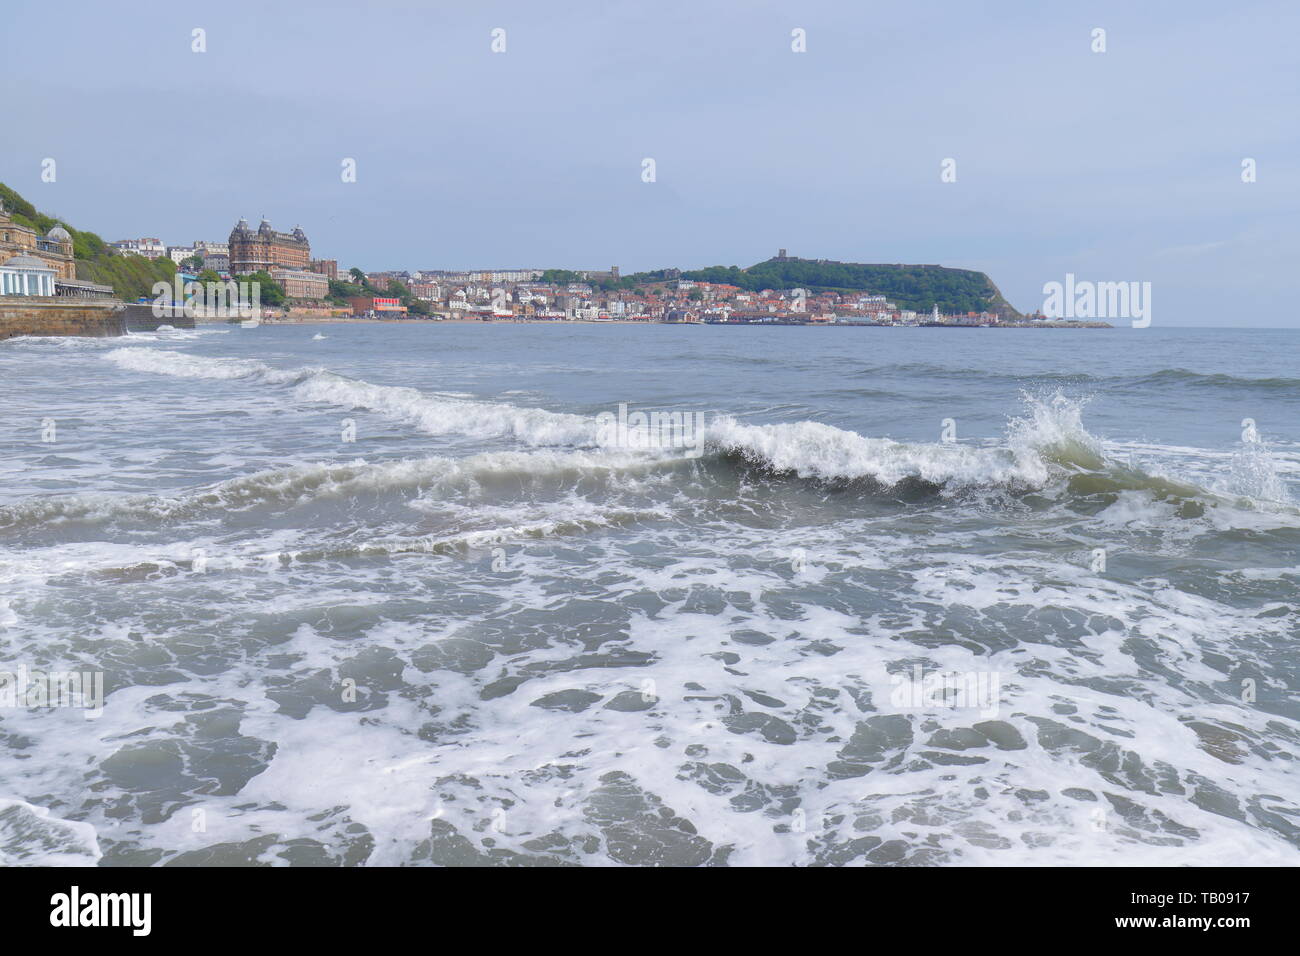 Rough seas in the seaside town of Scarborough in North Yorkshire,UK Stock Photo